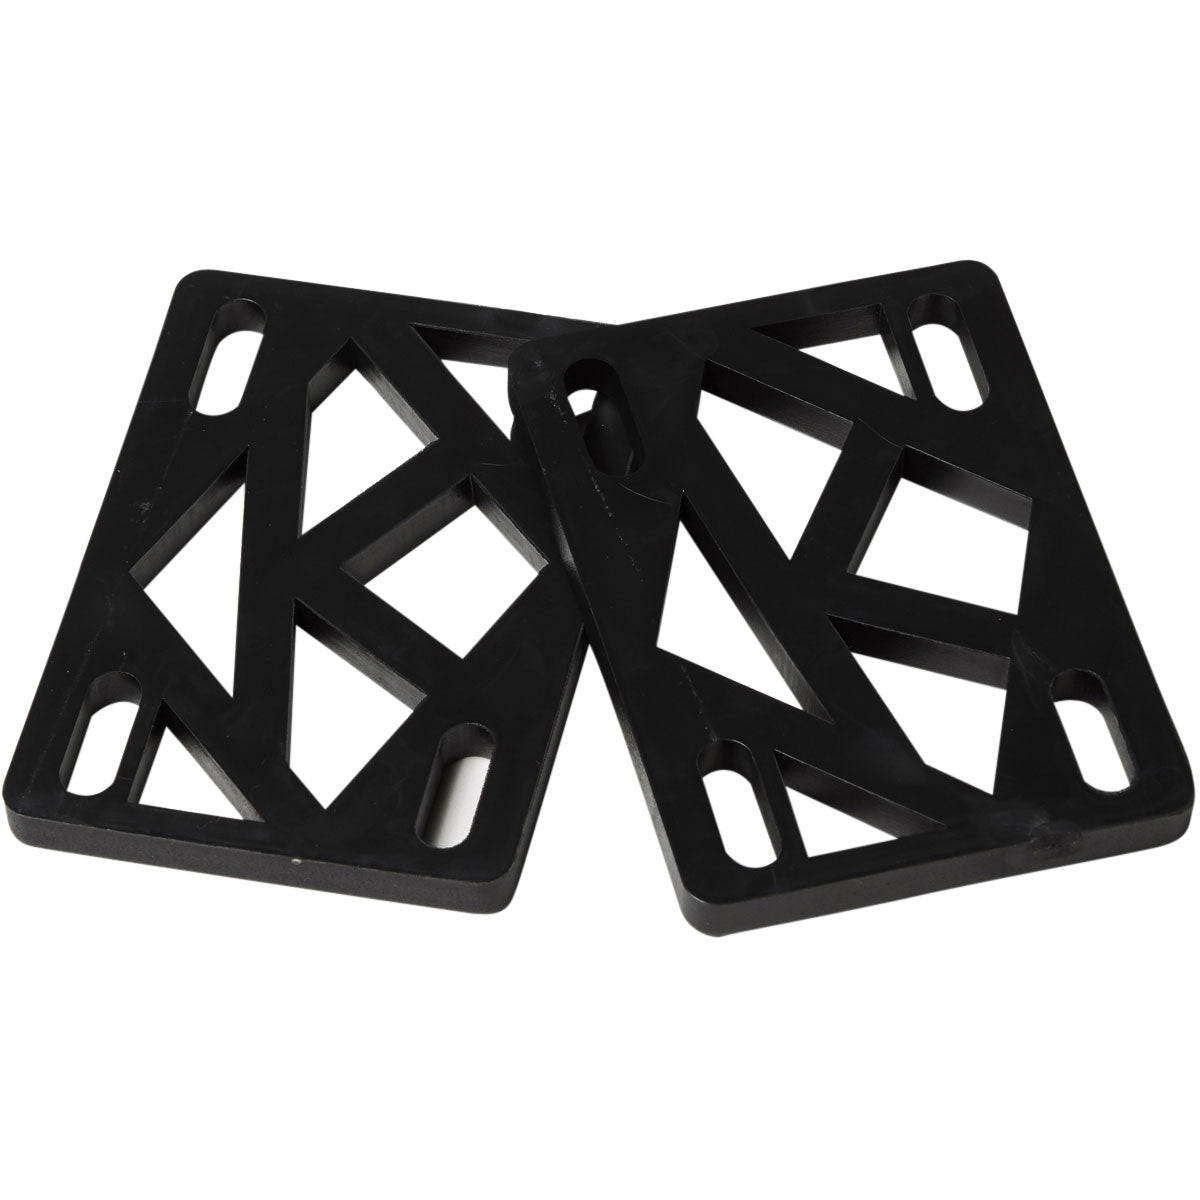 Krooked 1/4 riser pads Sunny Smith LLC